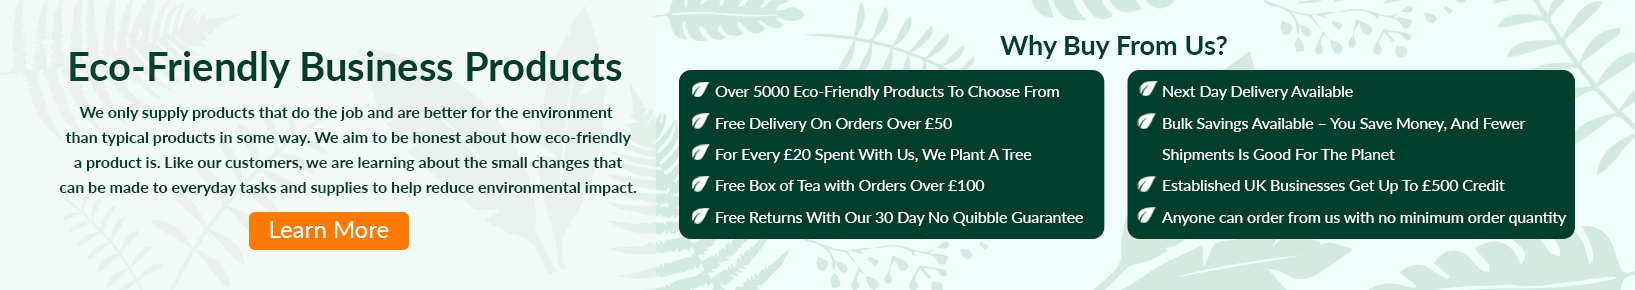 Eco-friendly business products